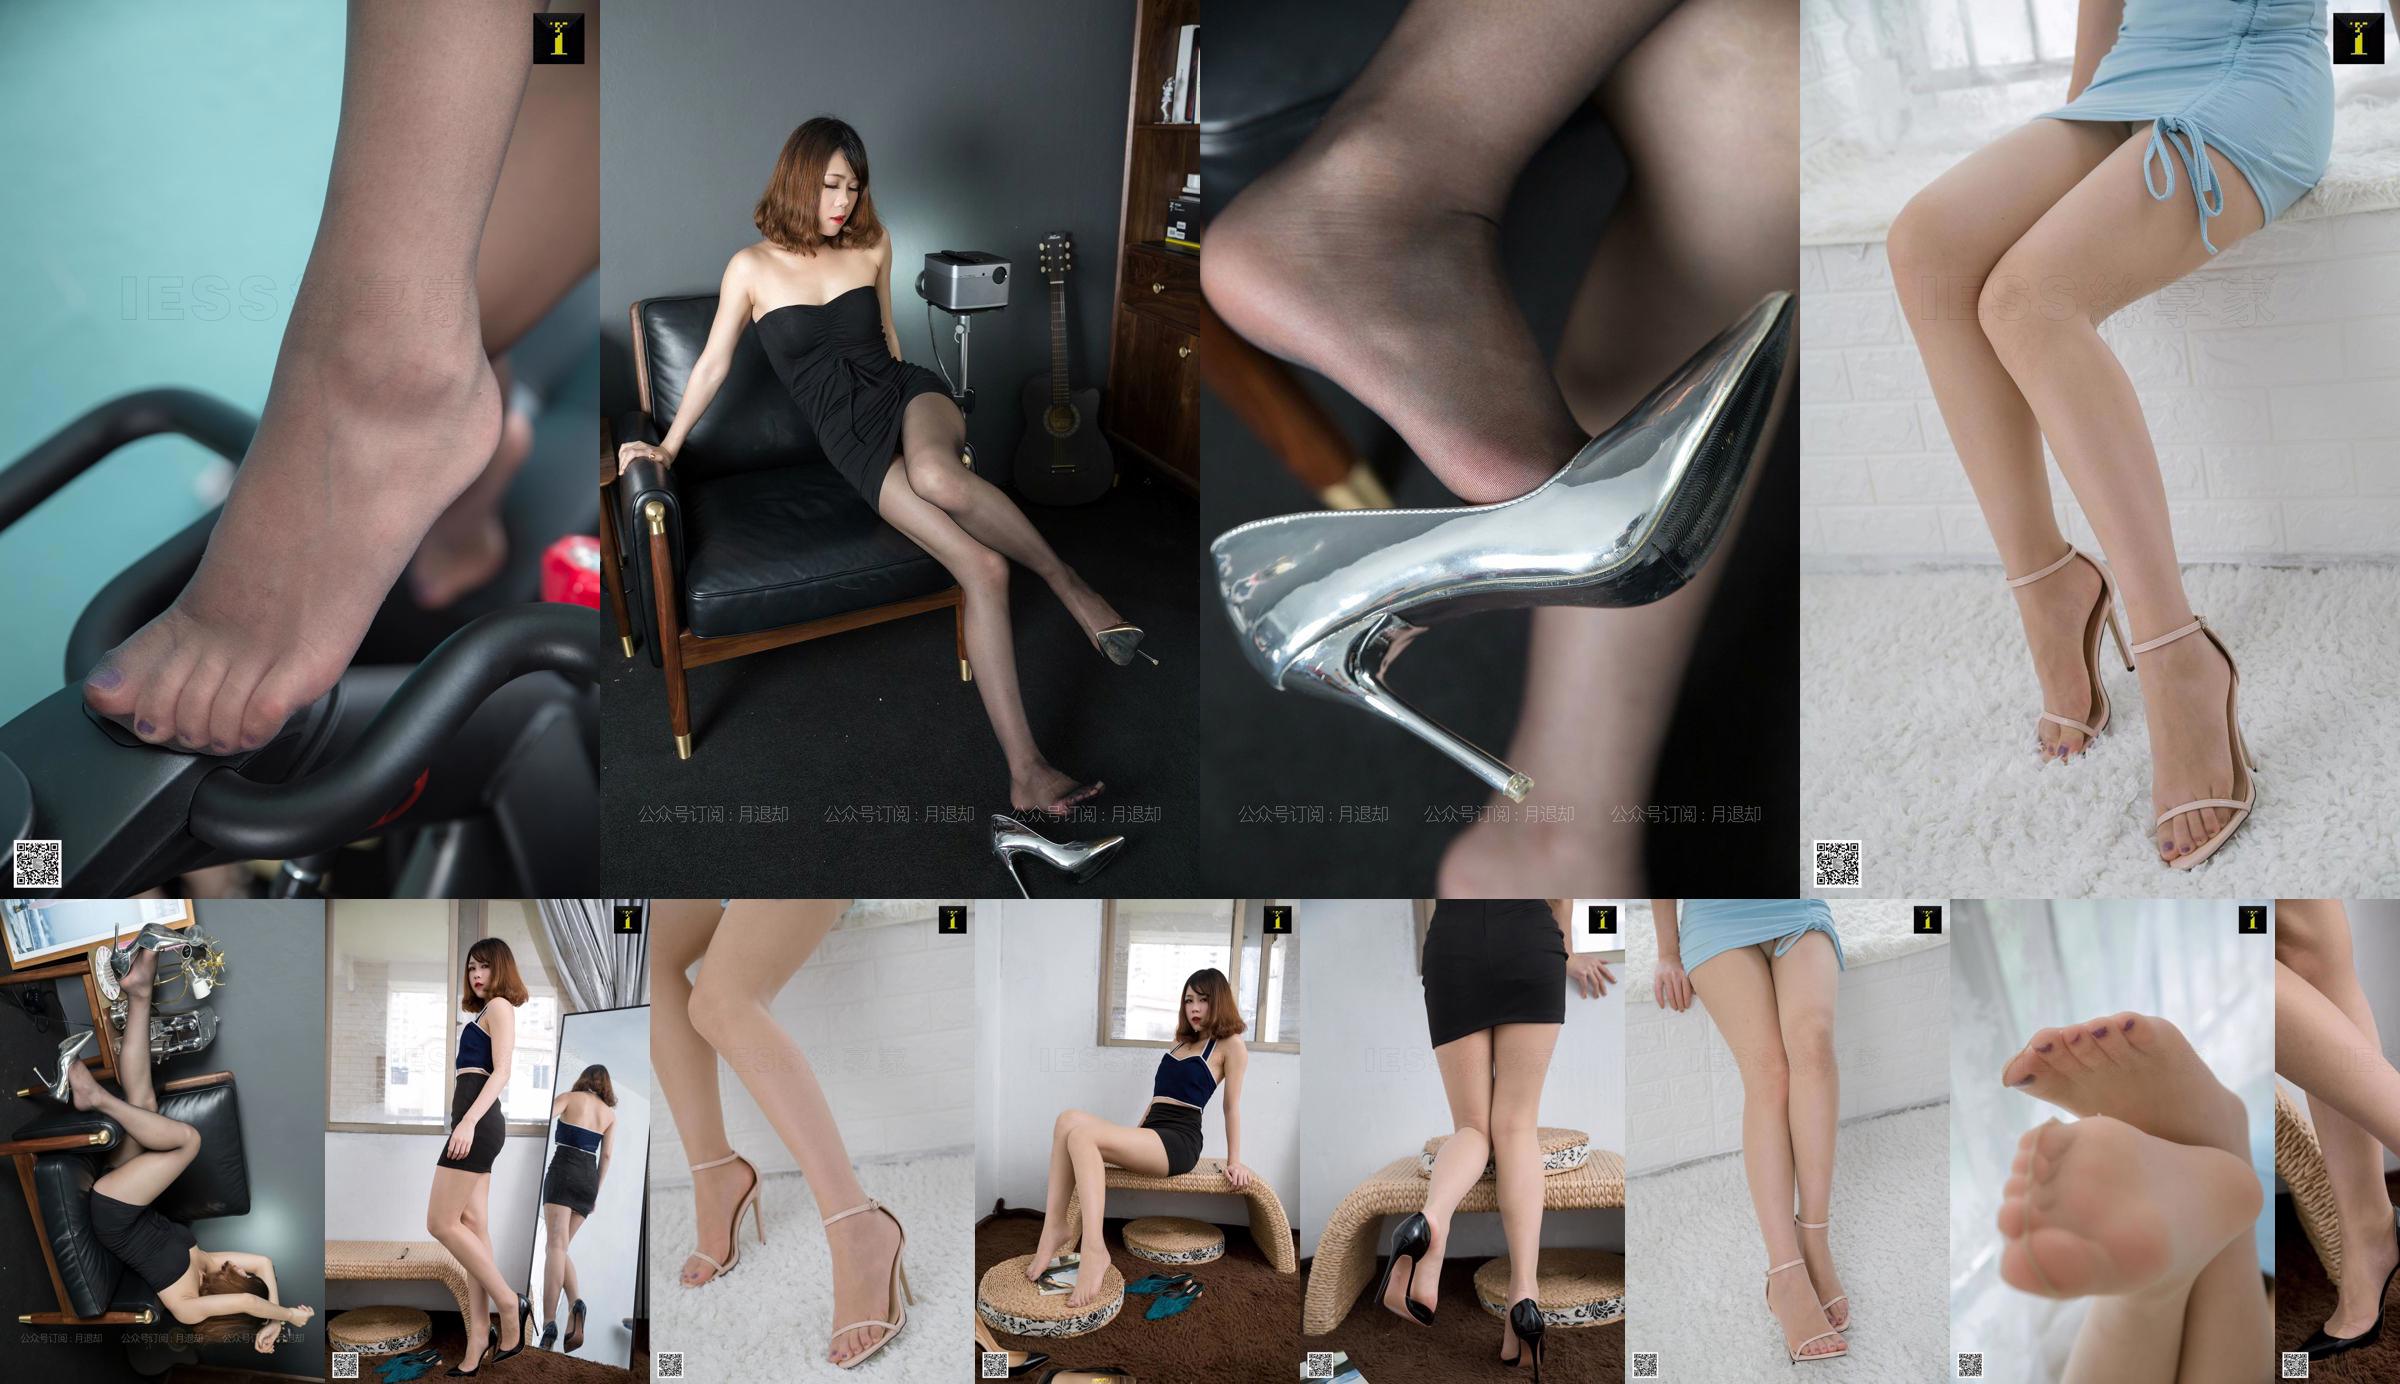 Model Diudiu "The Magic of Super Shallow Mouth and High Heels" [IESS Weixiang] Beautiful legs in stockings No.5d8fa3 Page 1